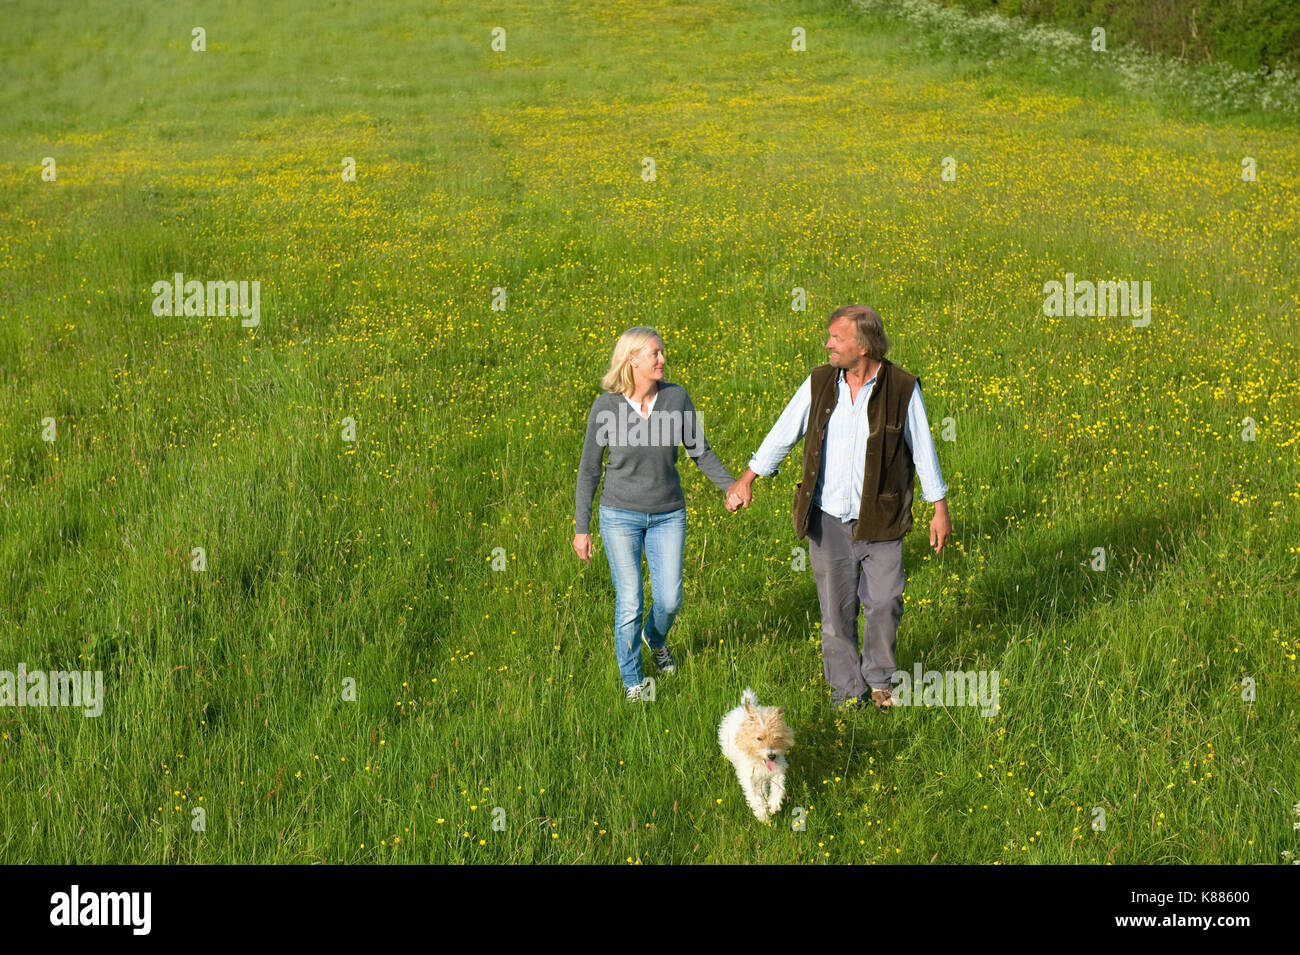 High angle view of man and woman walking hand in hand across a meadow, small dog running beside them. Stock Photo